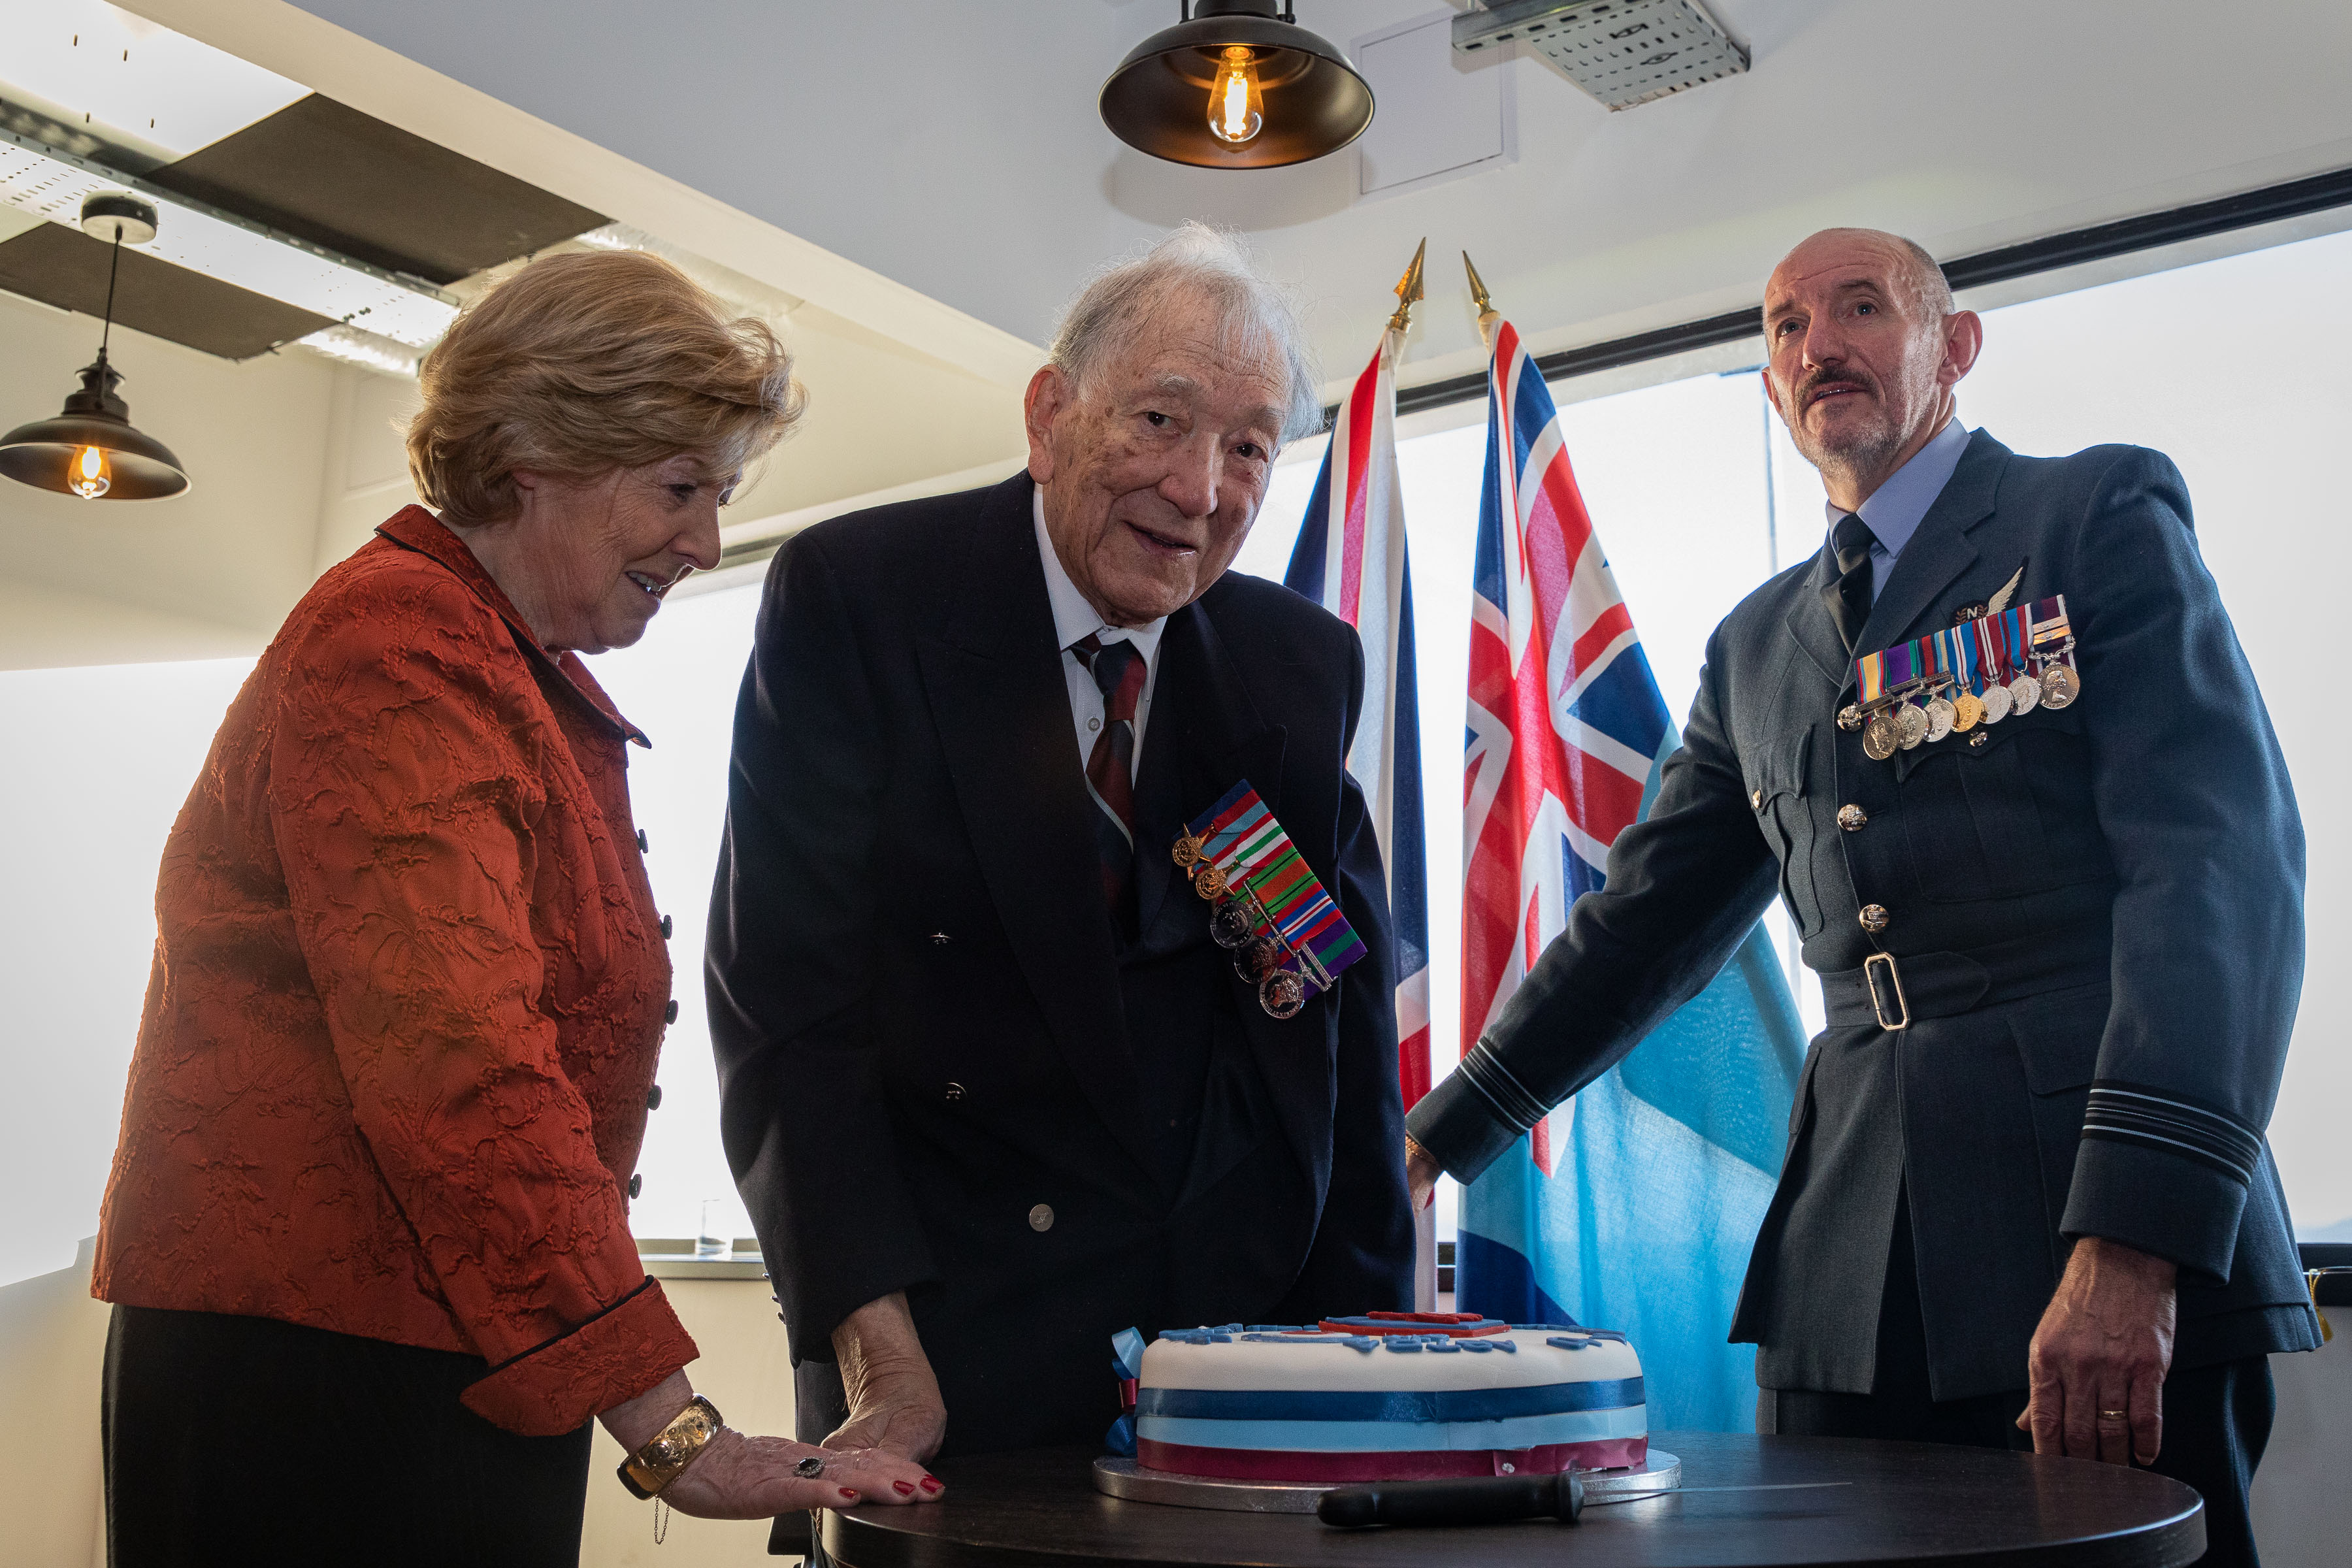 Image shows RAF aviators and veterans with birthday cake.